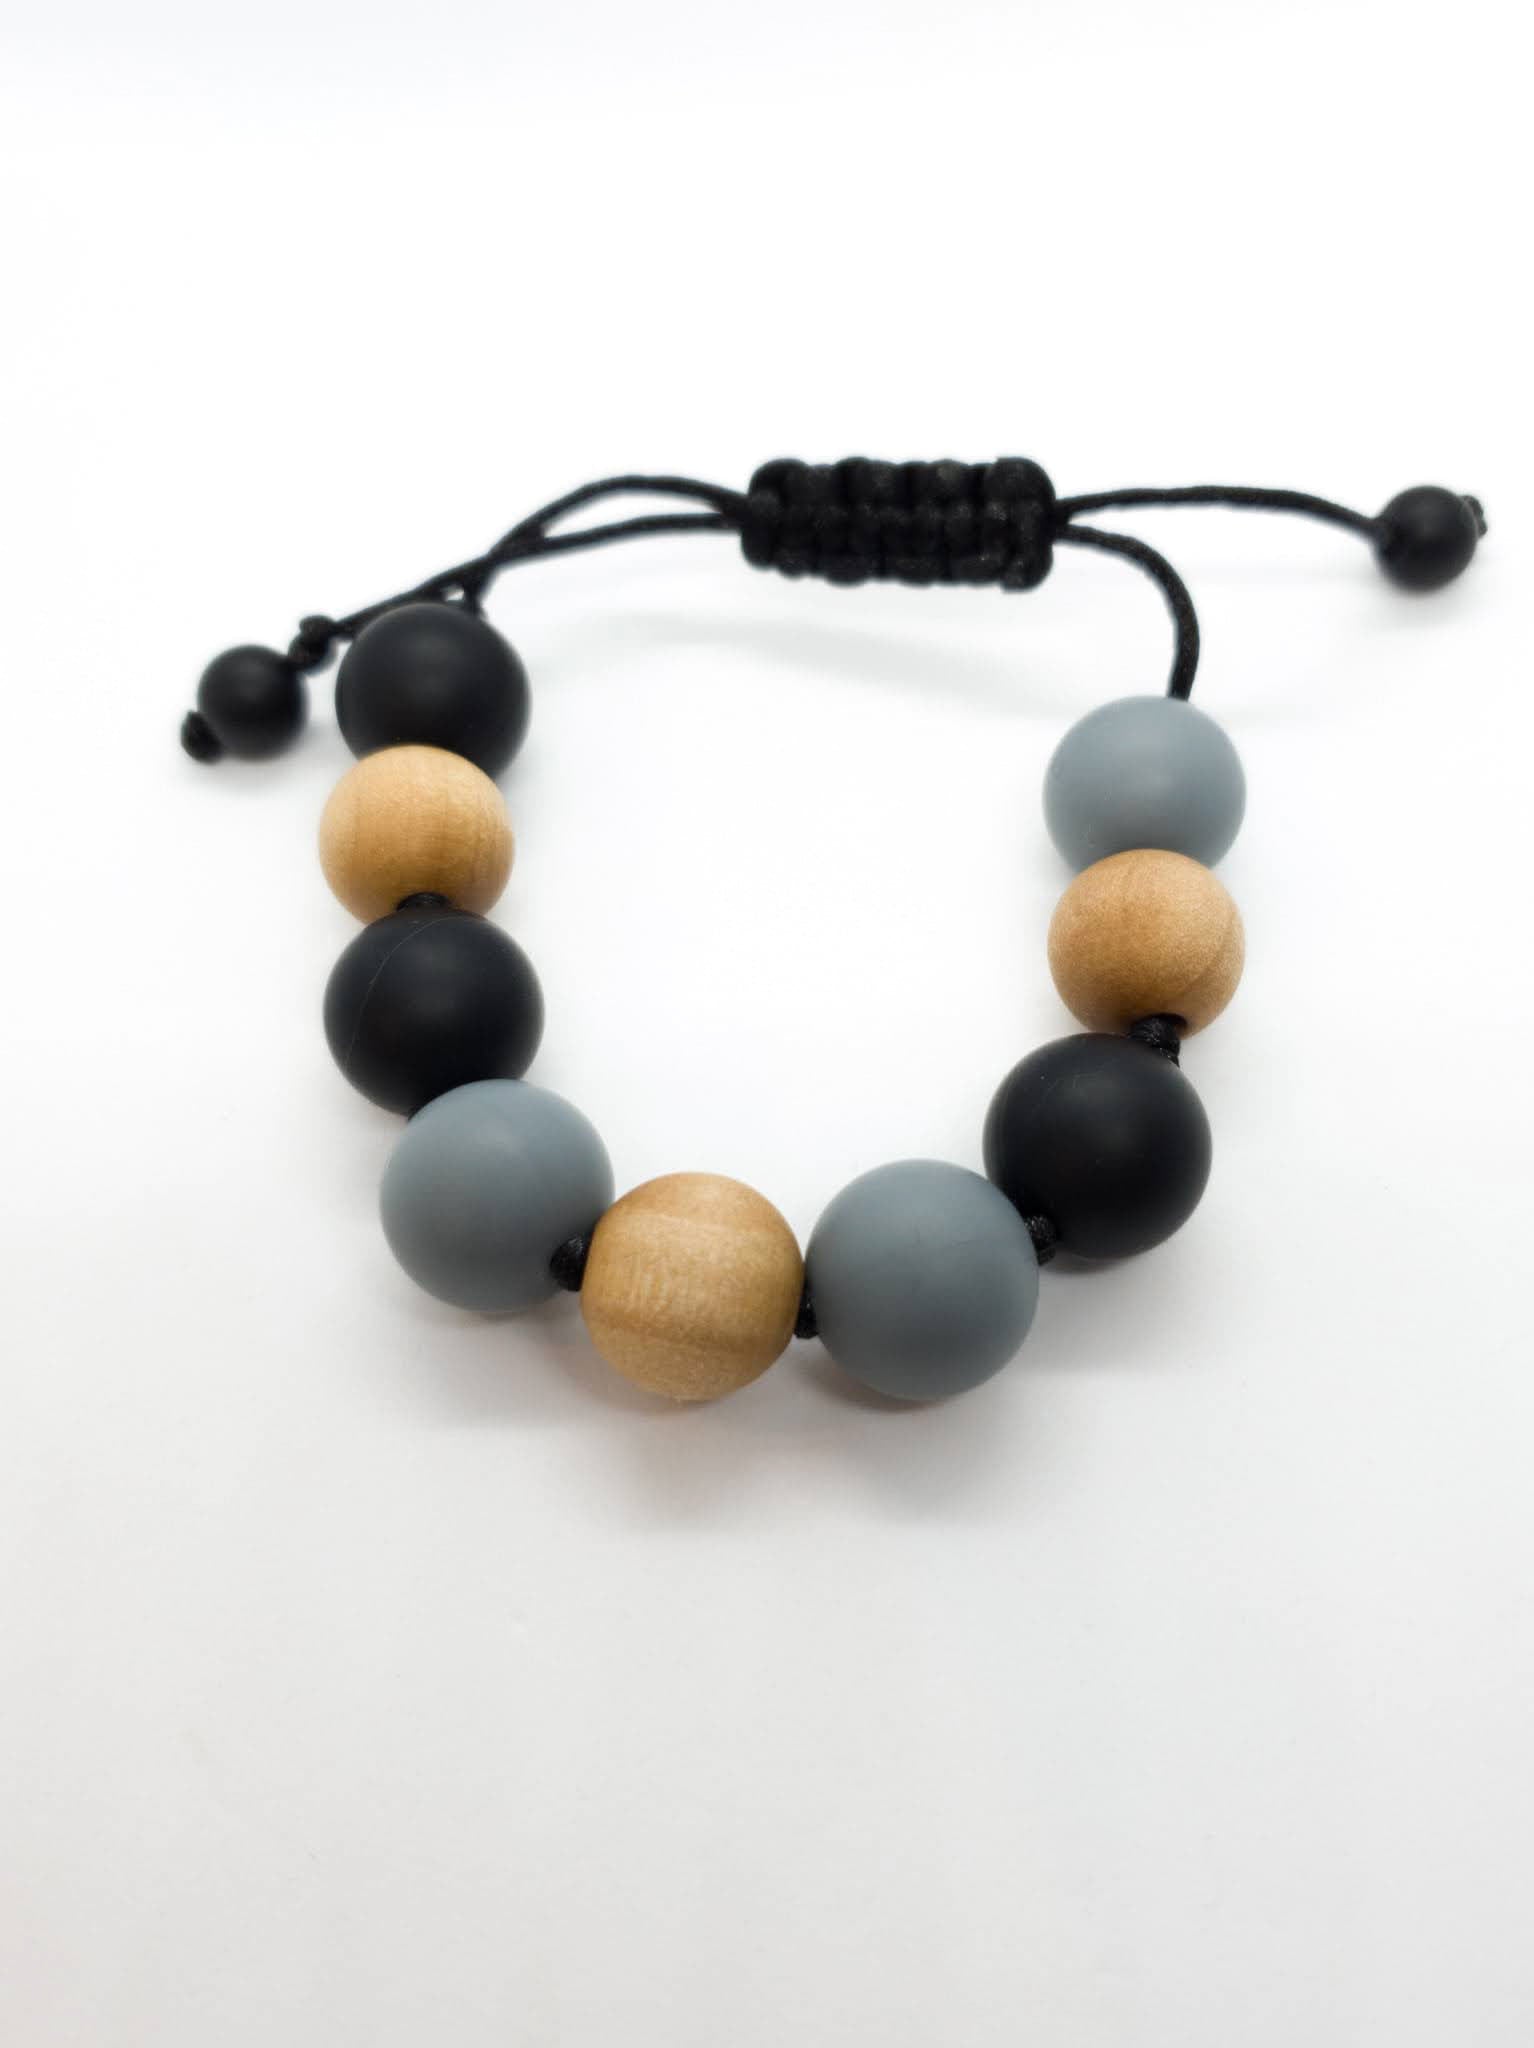 Our Chew Sensory Bracelet Looks Great & Fits Kids and Adults